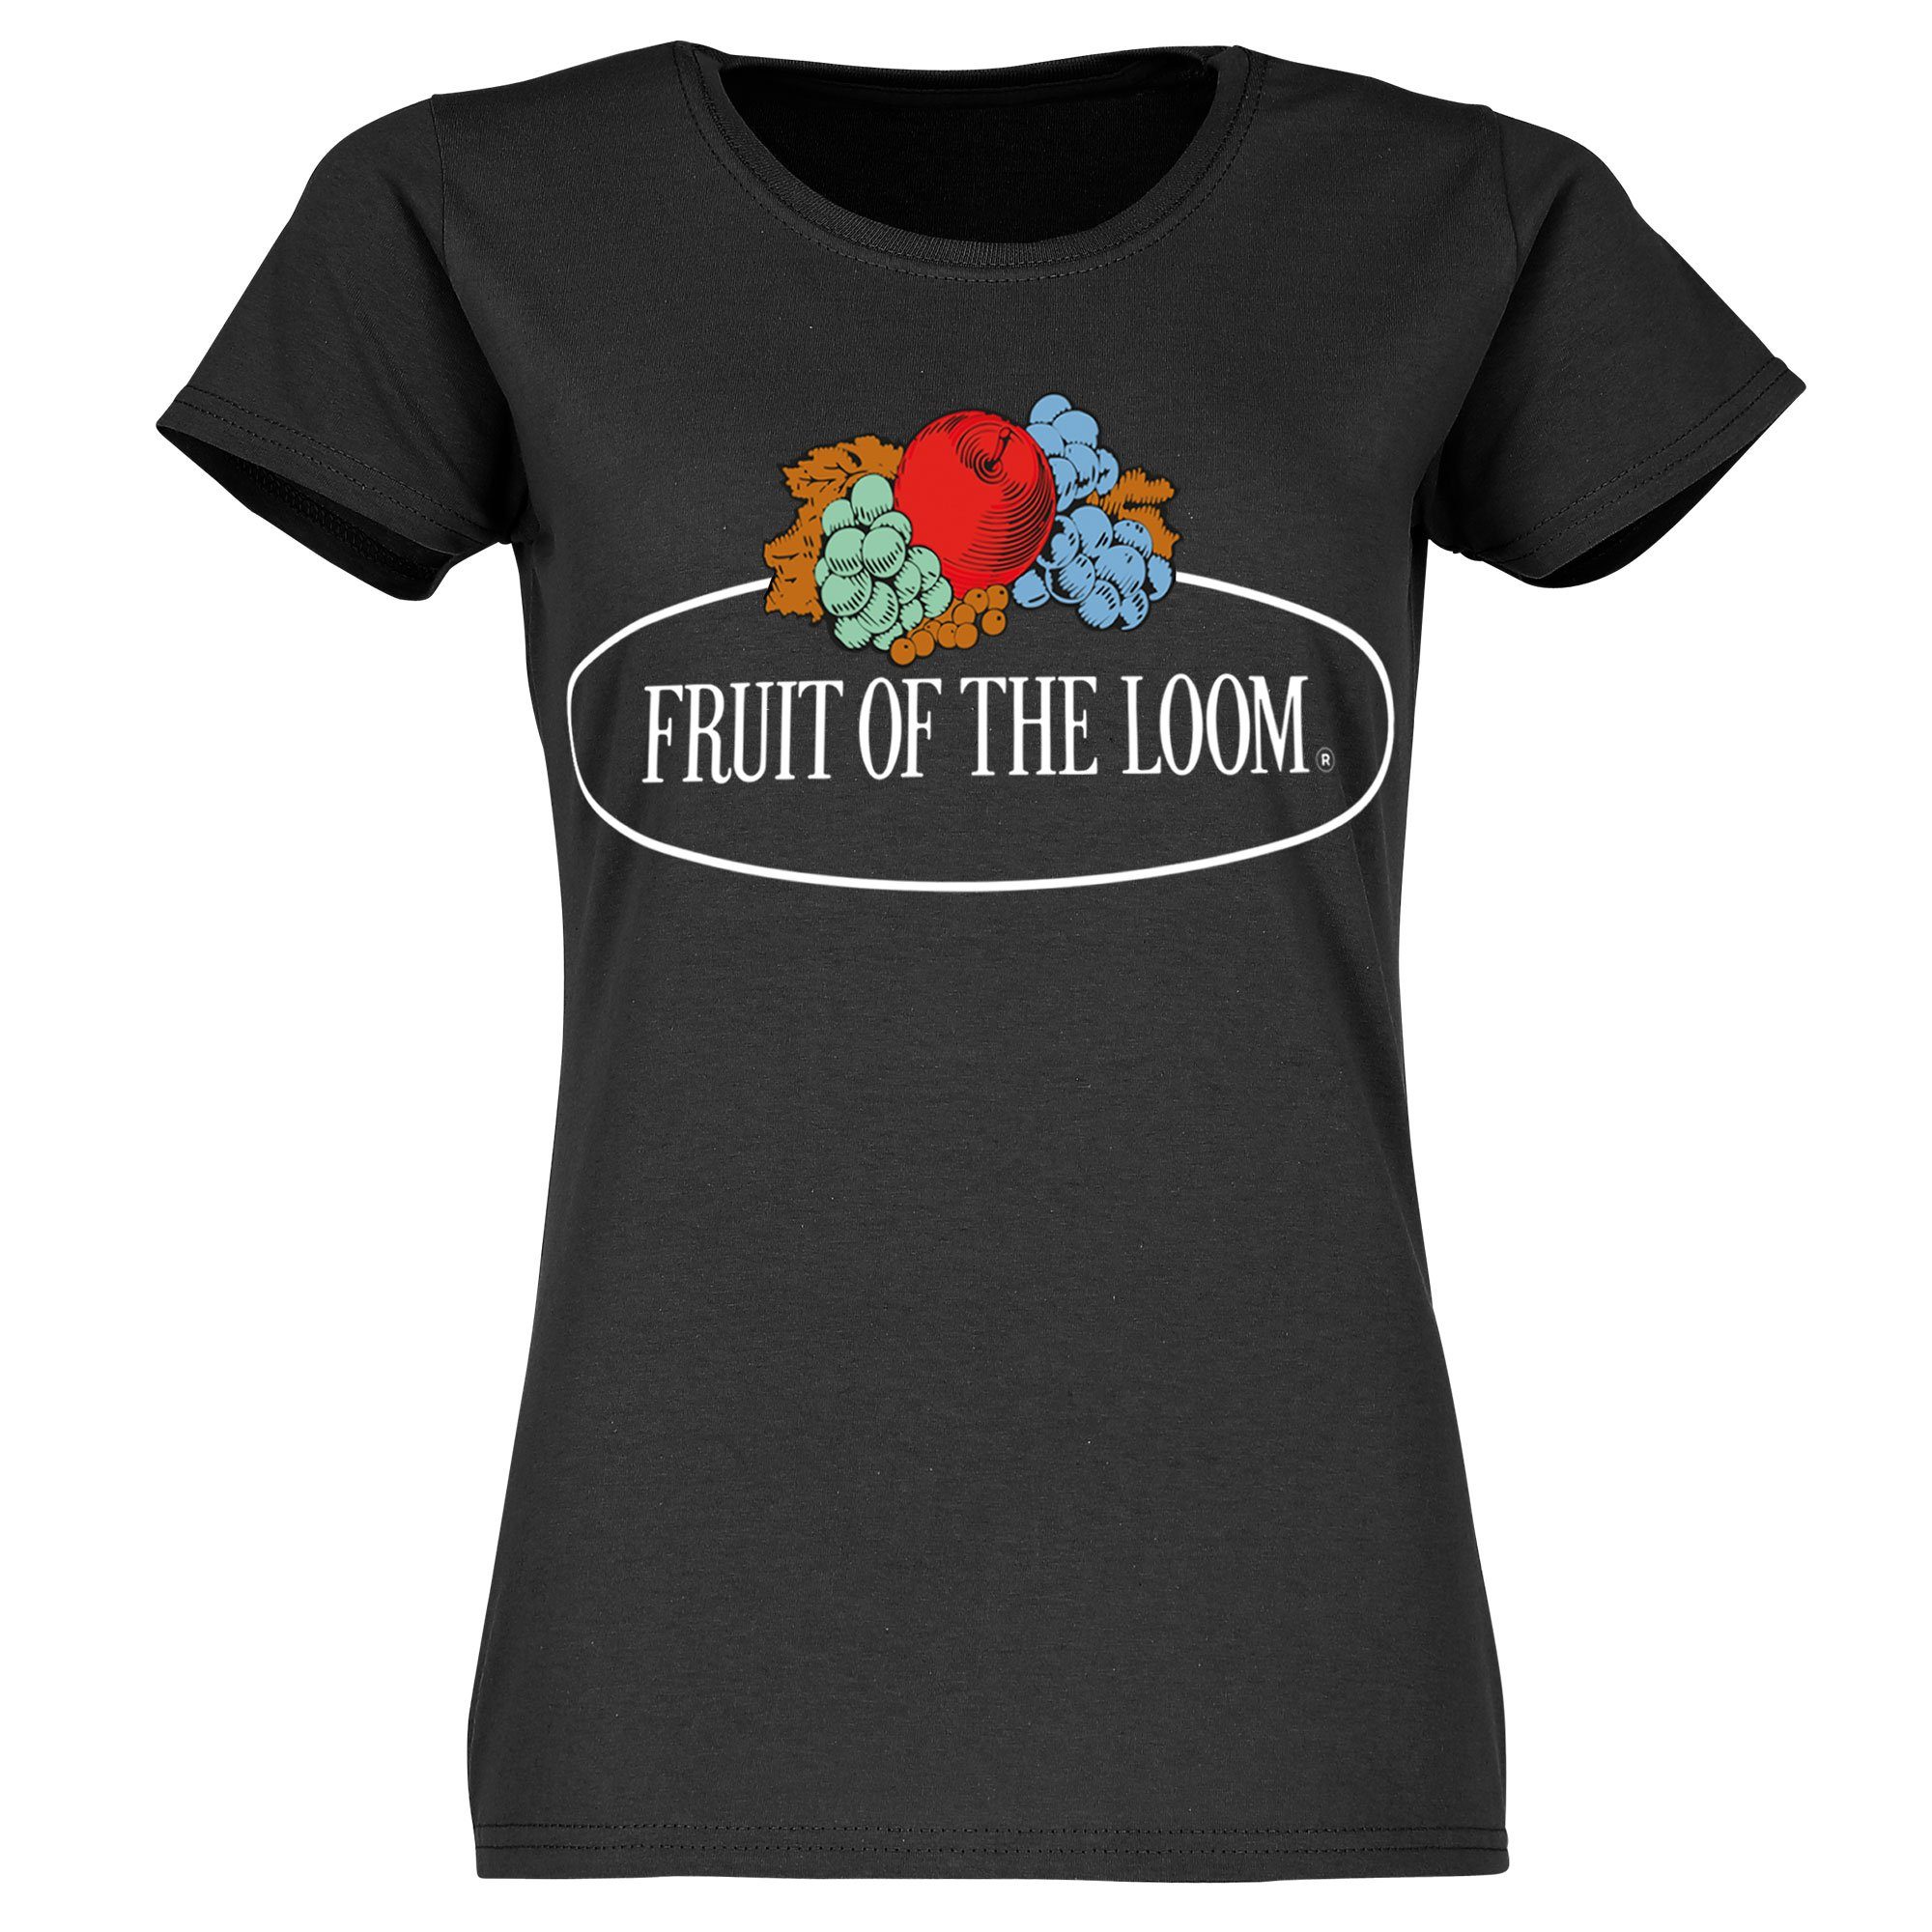 Fruit of the Loom Rundhalsshirt Fruit of the Loom Fruit of the Loom Damen T-Shirt mit Logo schwarz